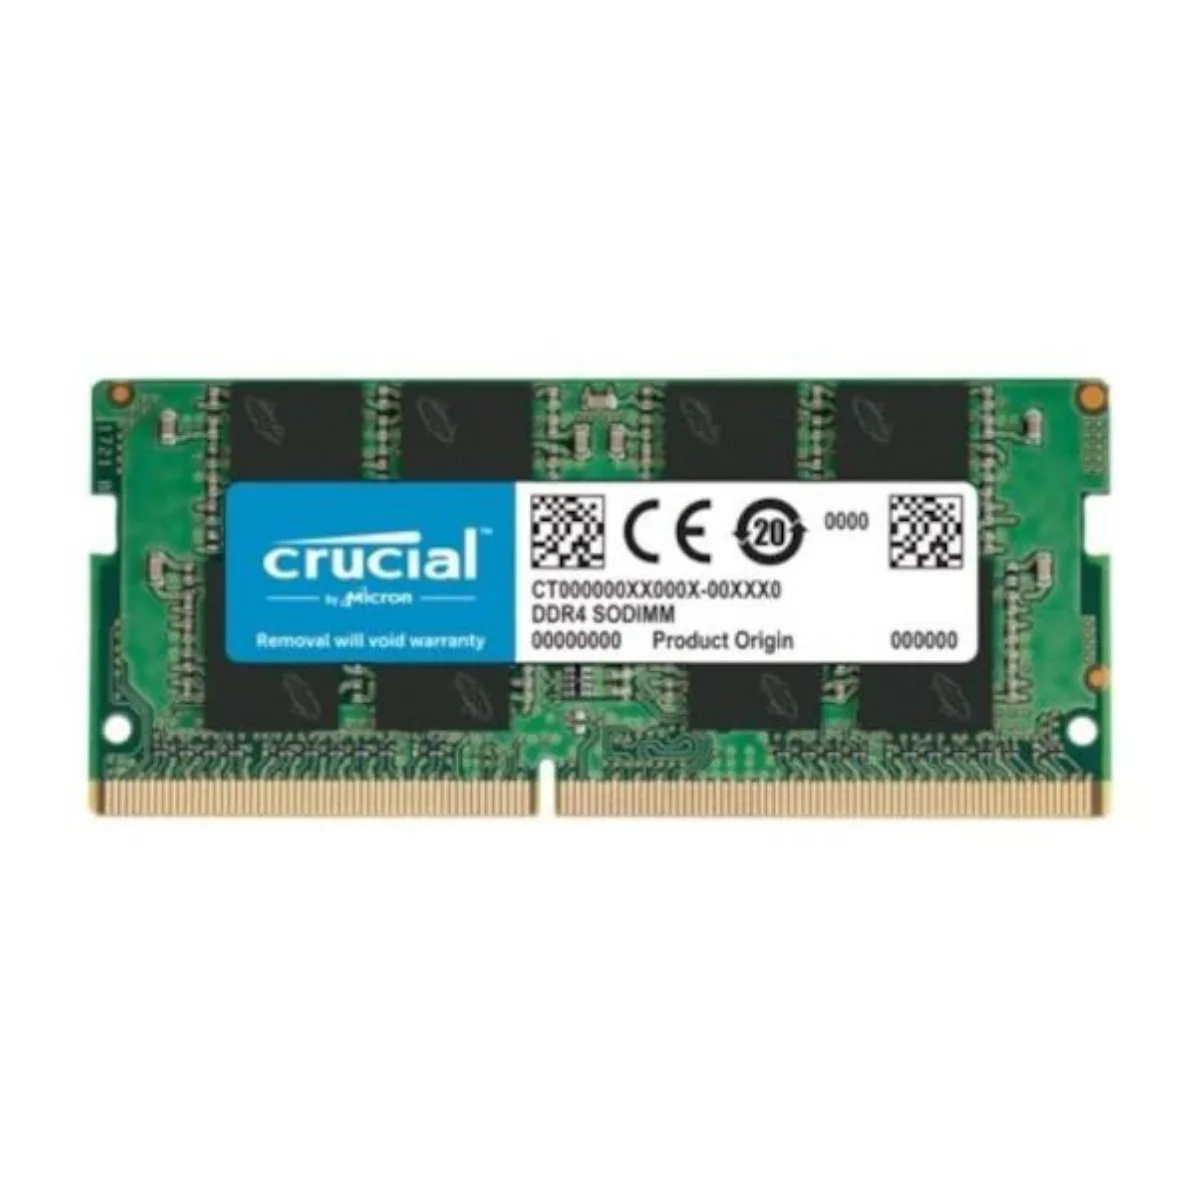 

Crucial Basics NTB 4, 8 and 16 GB DDR4 2666 MHz CL19 Ram Memories for Notebook CB4GS2666 CB8GS2666 CB16GS2666